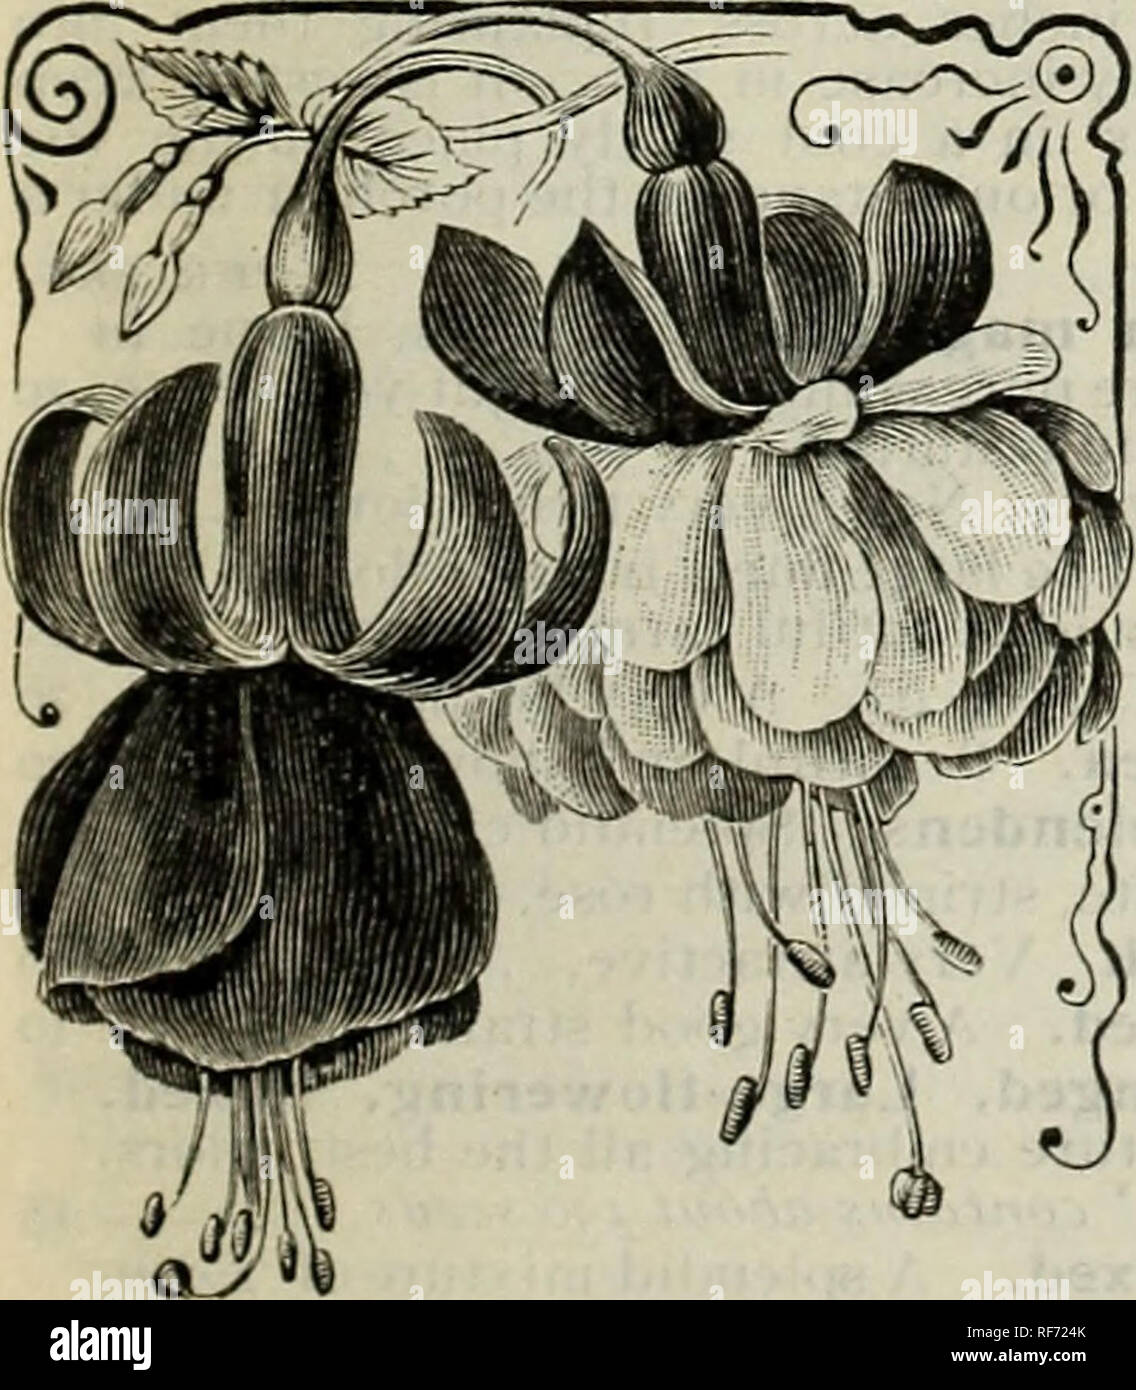 . Burpee's 1902 farm annual : vegetable, flower and farm seeds. Nursery stock Pennsylvania Philadelphia Catalogs; Vegetables Seeds Catalogs; Flowers Seeds Catalogs; Bulbs (Plants) Catalogs. CYCLAMEN PERSICUM. CYCLAMENS. Popular, free-flowering, bulbous plants for house culture, producing the graceful orchid-like flowers during the fall, winter, and spring. The young plants develop a compressed bulb from which spring the round glossy leaves and the slender flower-stalks which bear the brilliant- hued flowers, airily poised above the foliage. The colors range from pearly white to the darkest cri Stock Photo